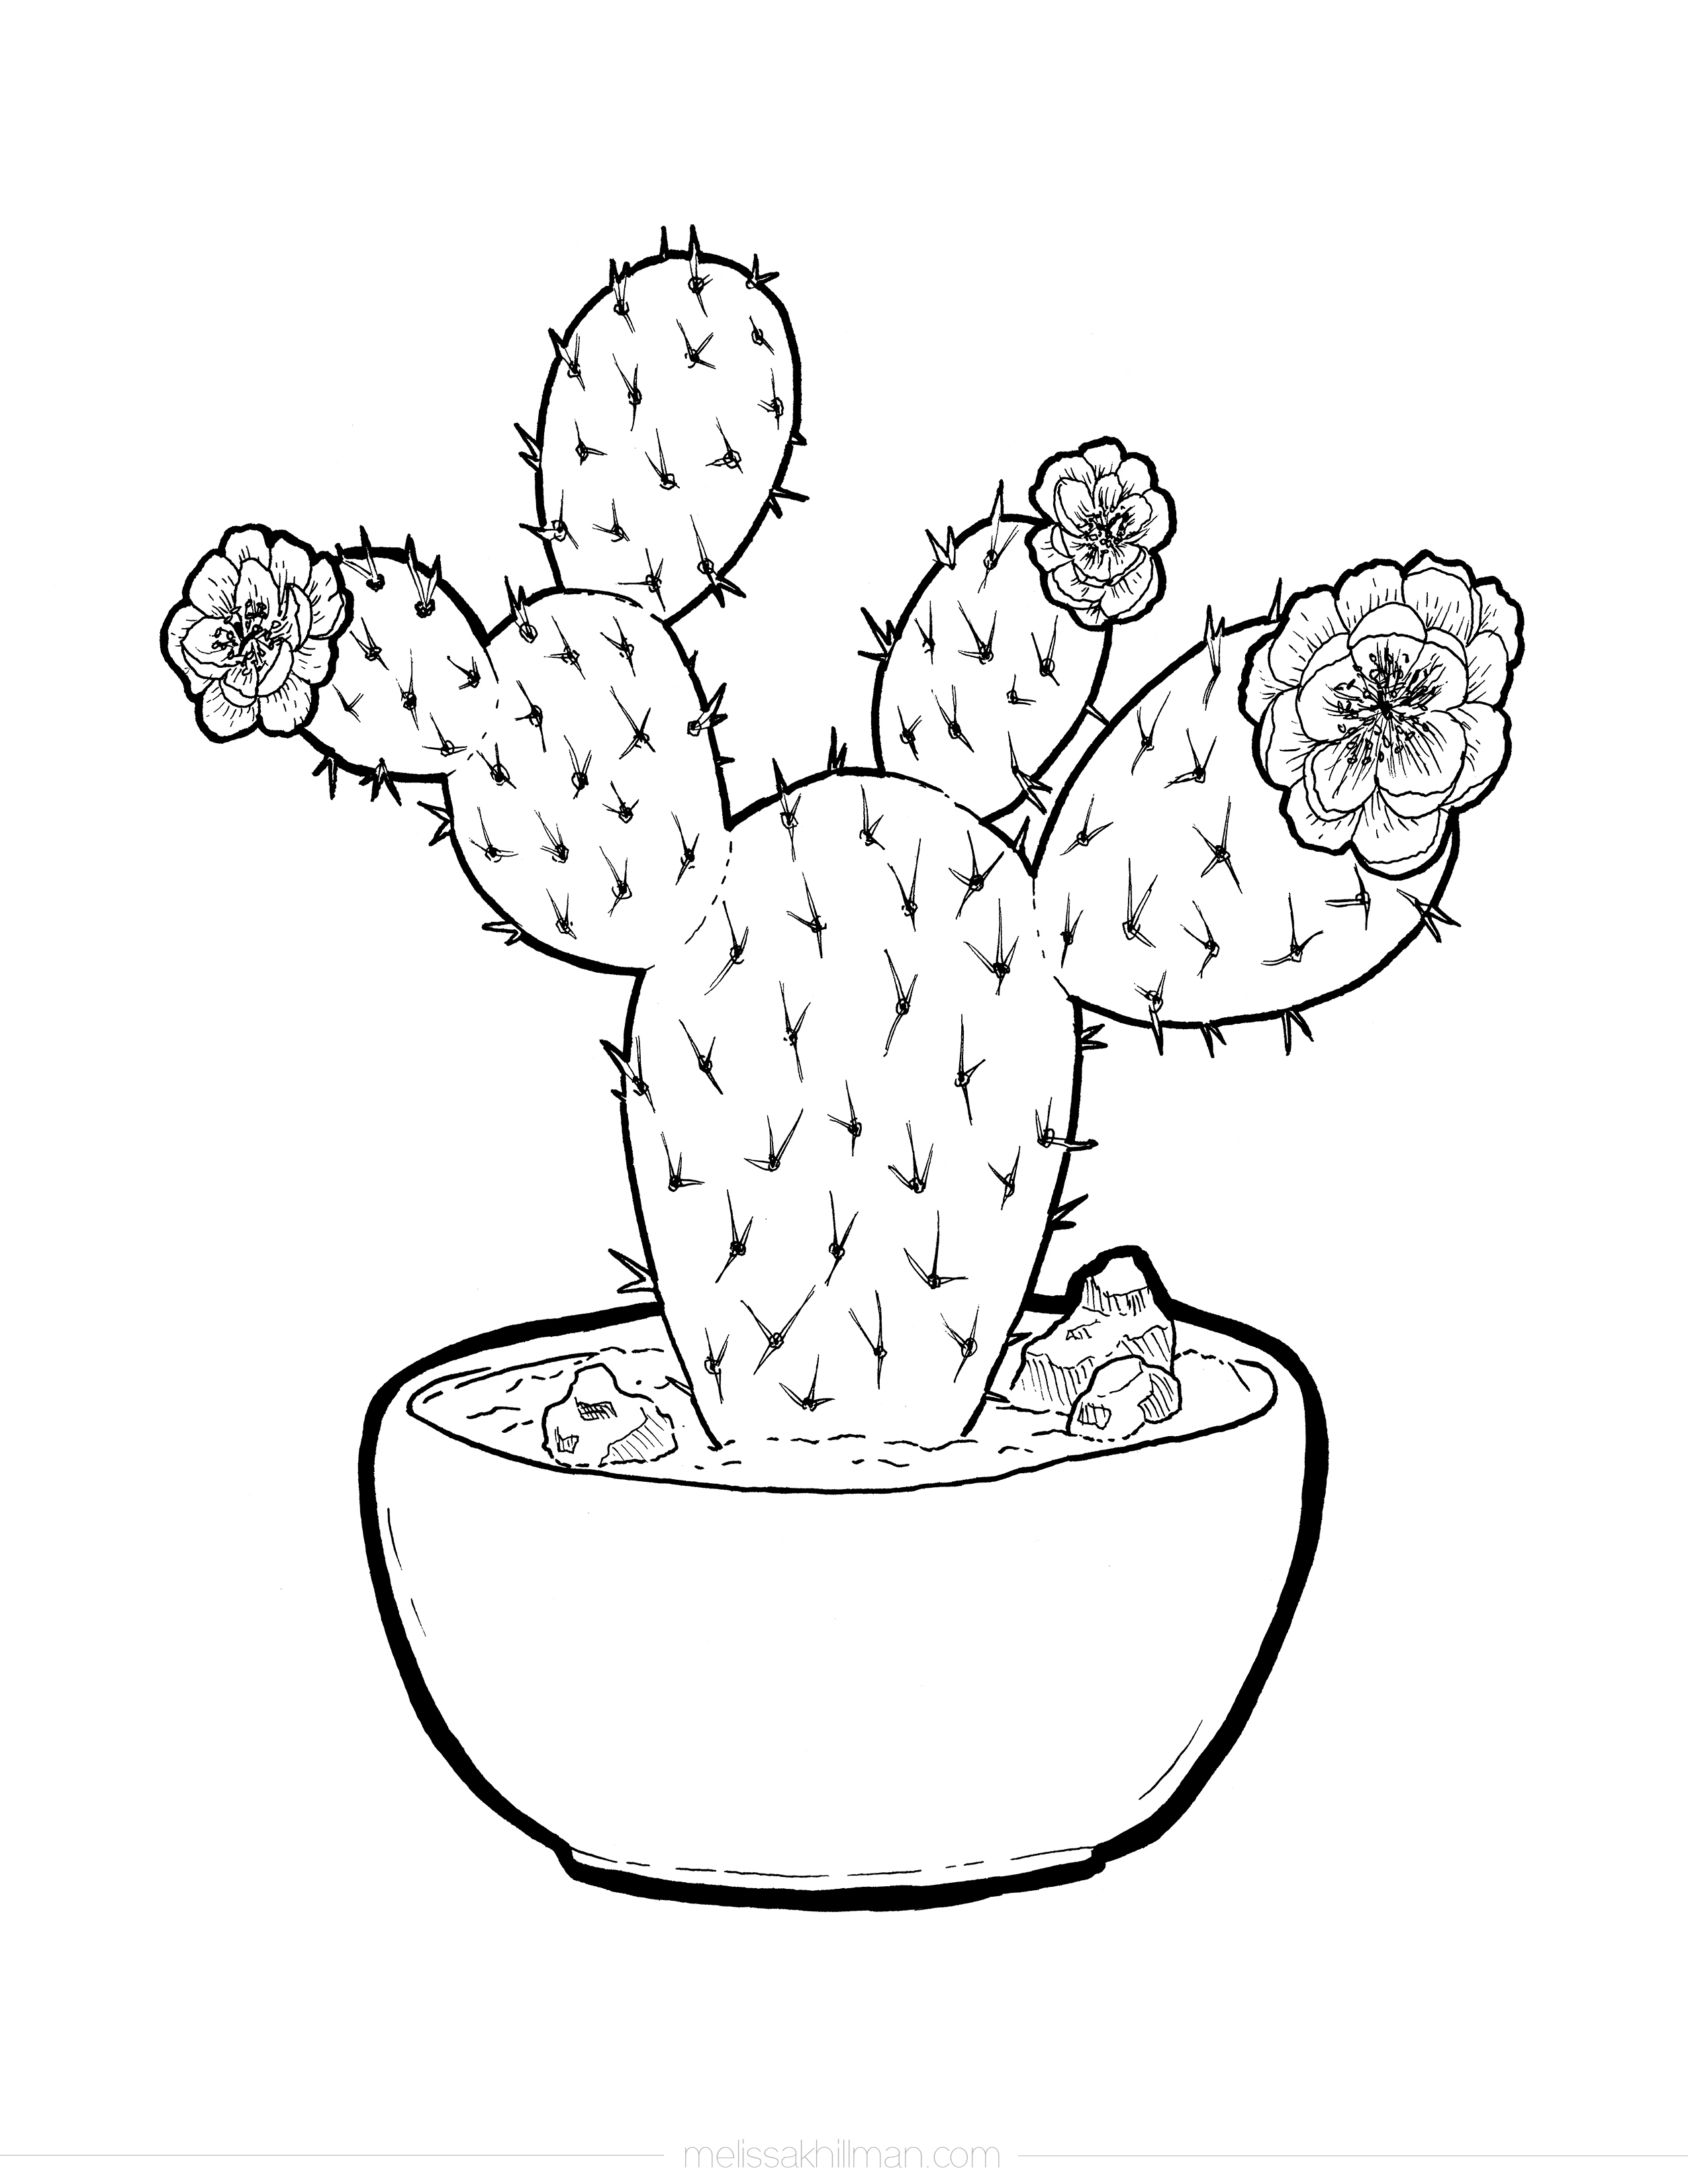 “Cactus” Coloring Page